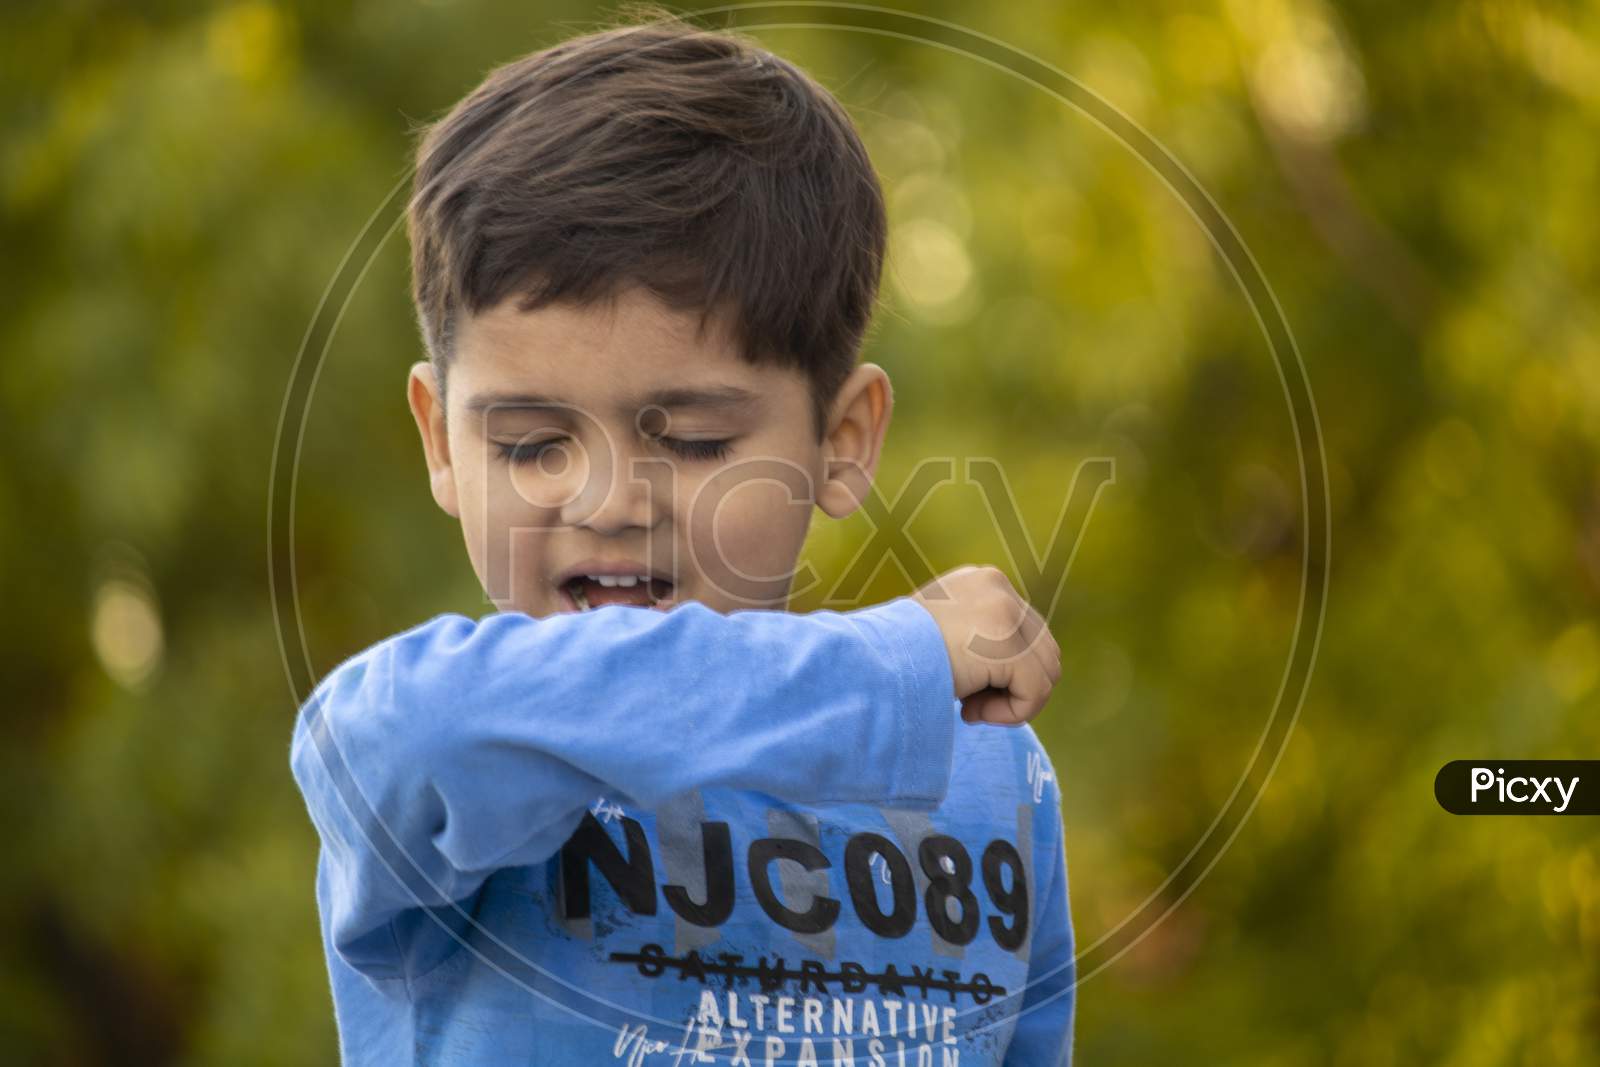 Indian Child Coughing On His Elbow Showing Tips To Protecting Corona Virus